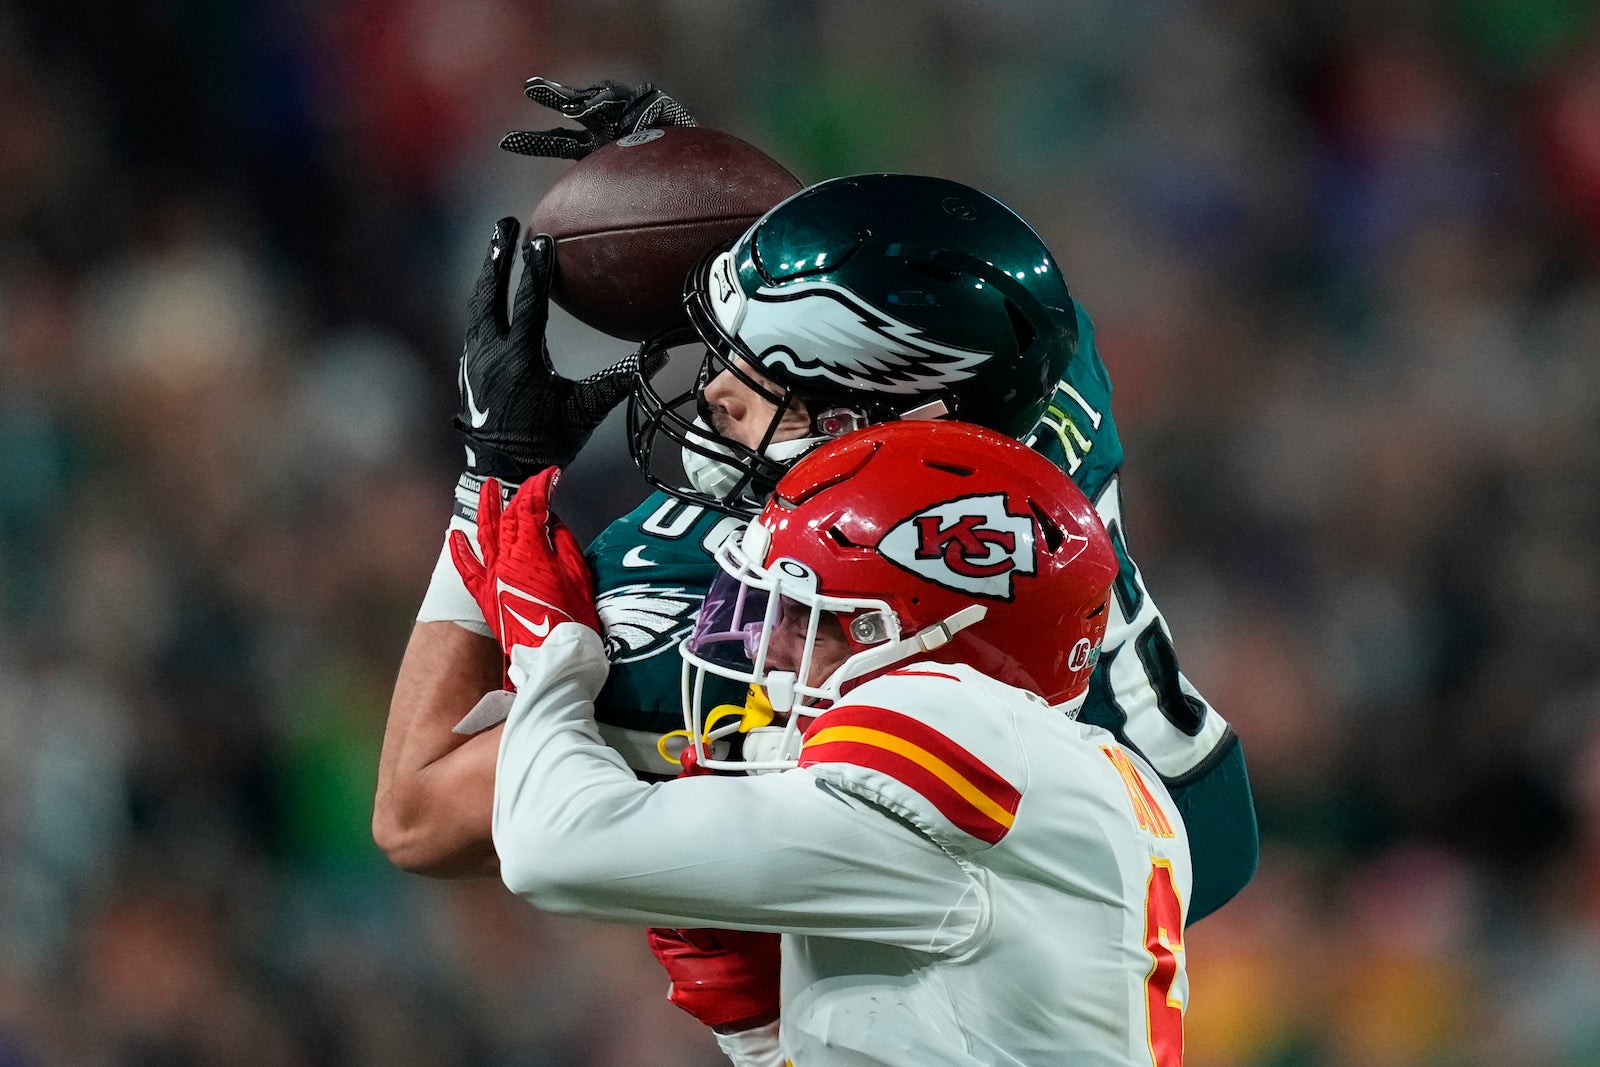 Super Bowl LVII: Patrick Mahomes leads Chiefs rally past Eagles 38-35 